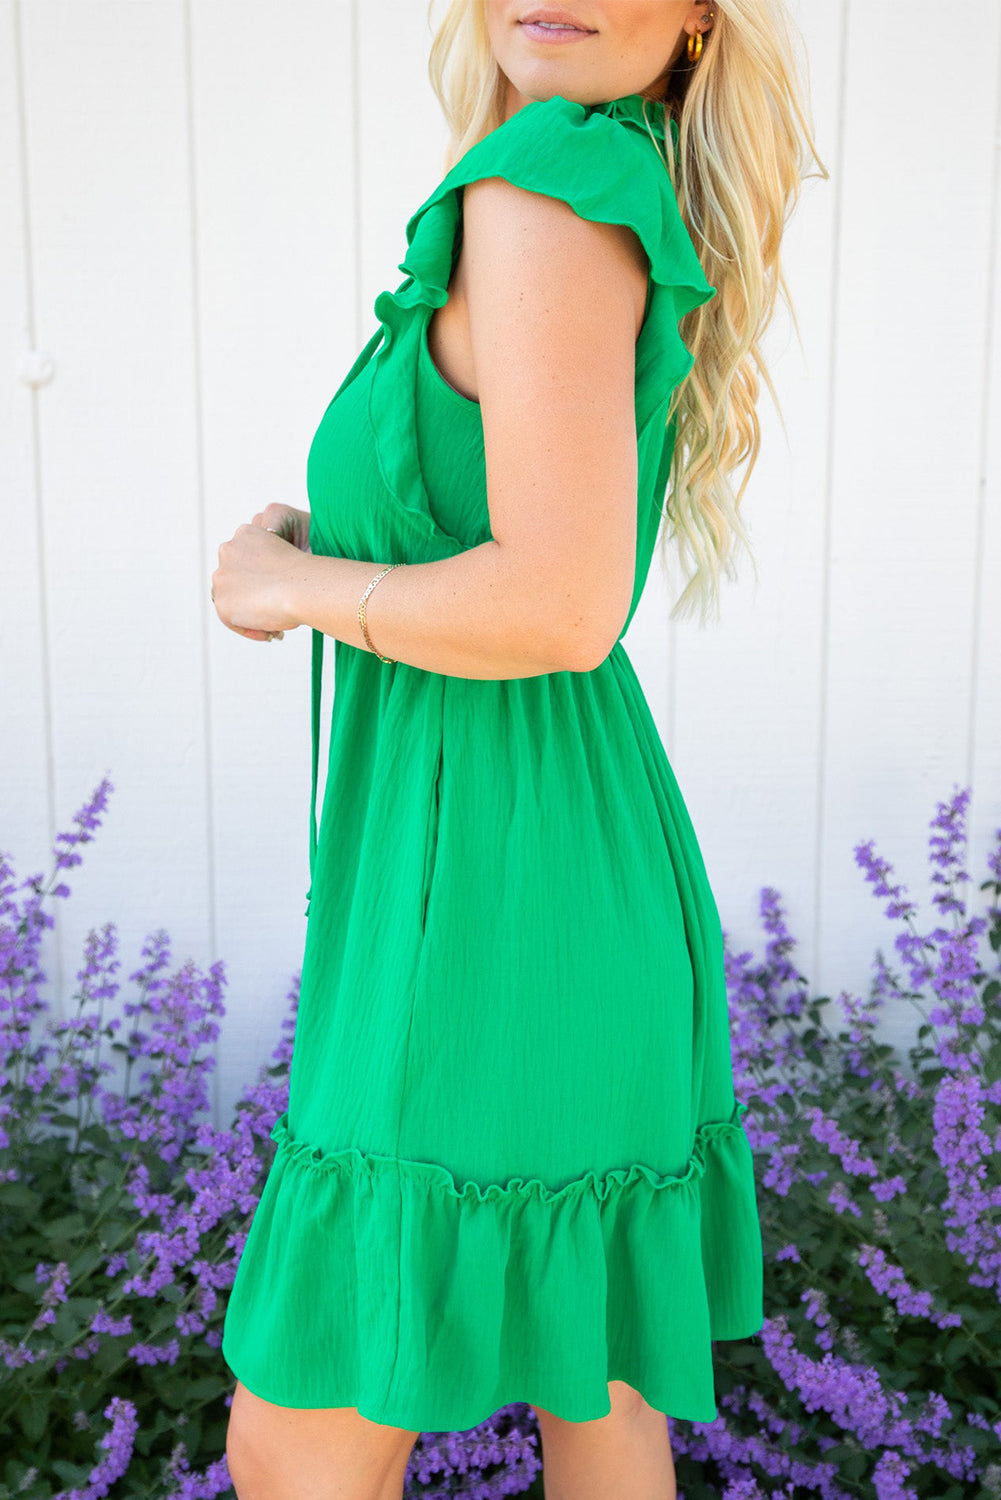 Fun and flirty summer fashion with vibrant colour and feminine ruffle details.